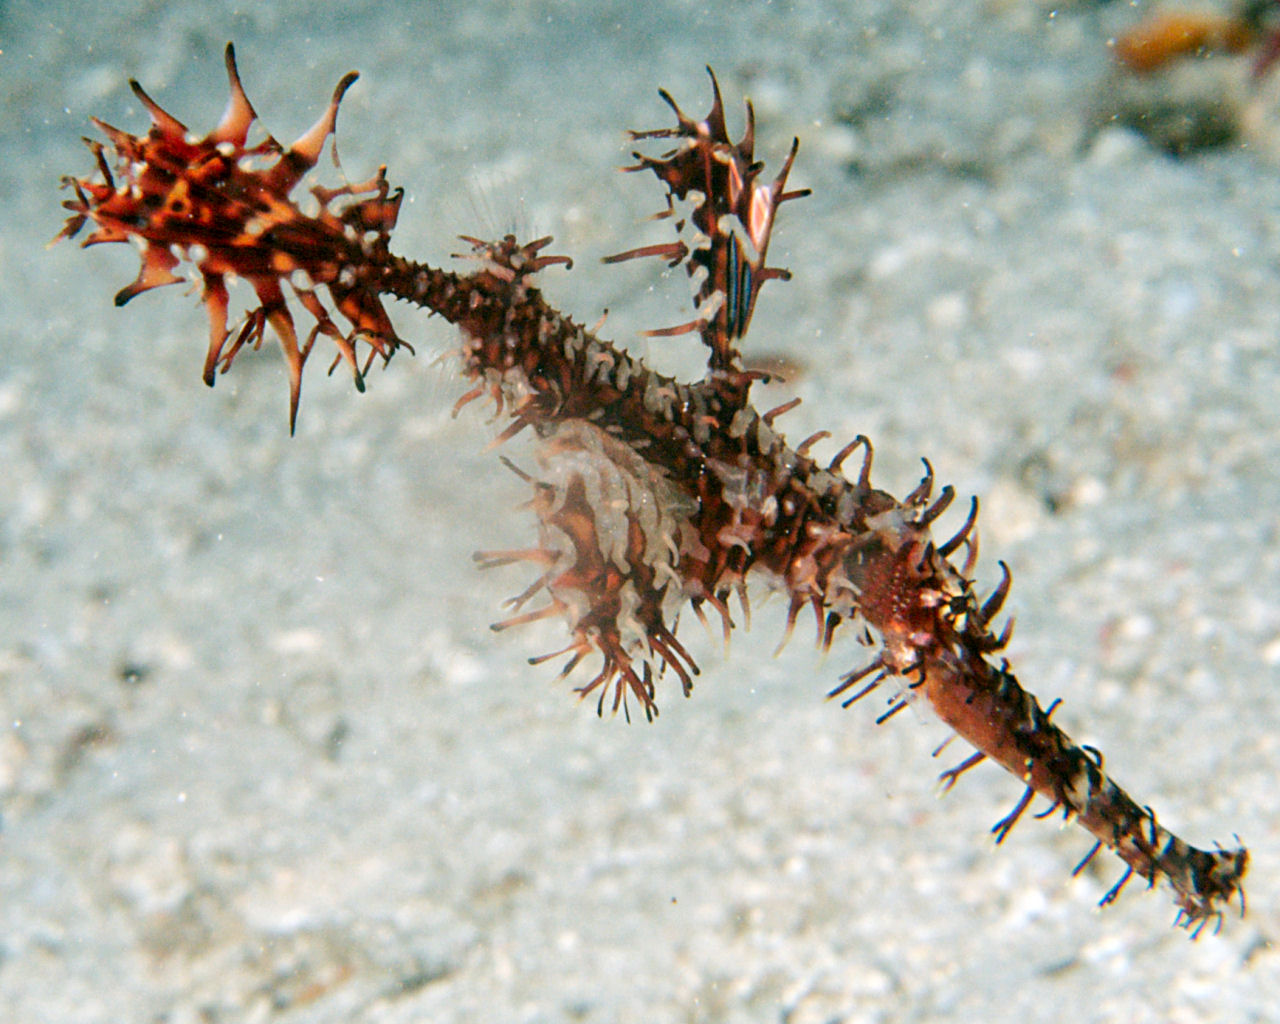 Ornate Ghost Pipefish at Drop Off